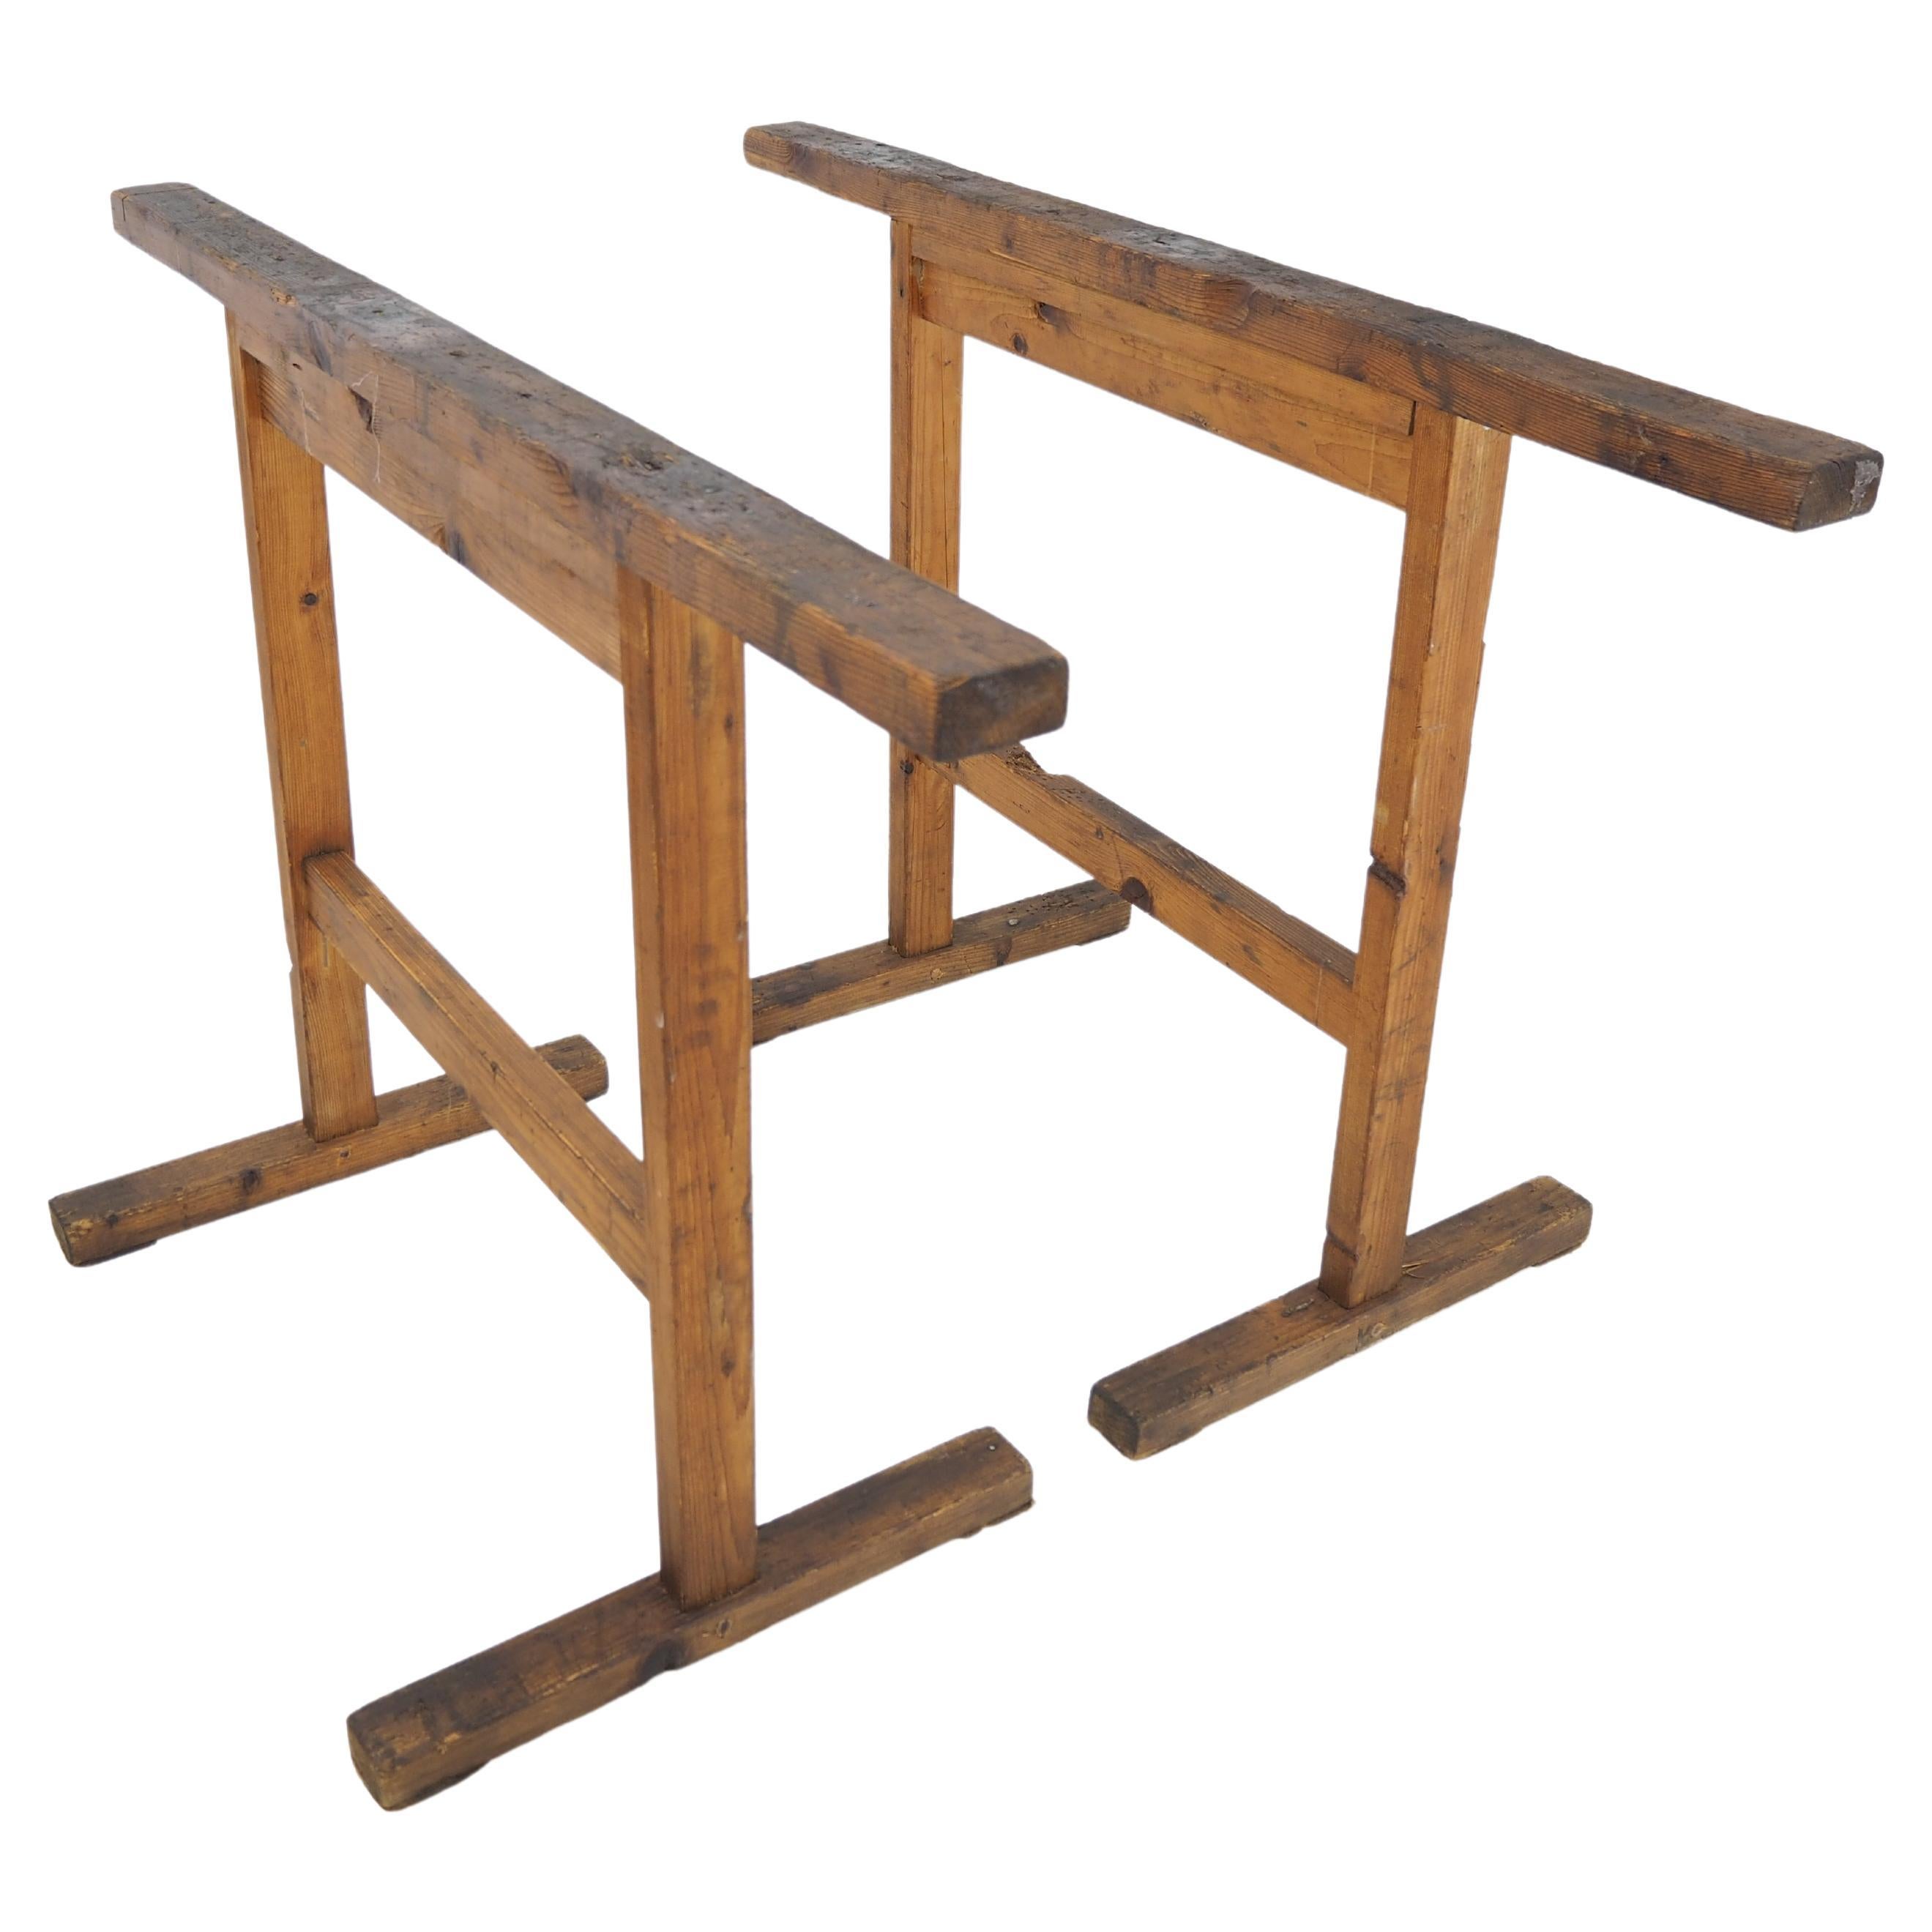 Pair of Industrial Wood Trestle Table Bases, Early 20th Century